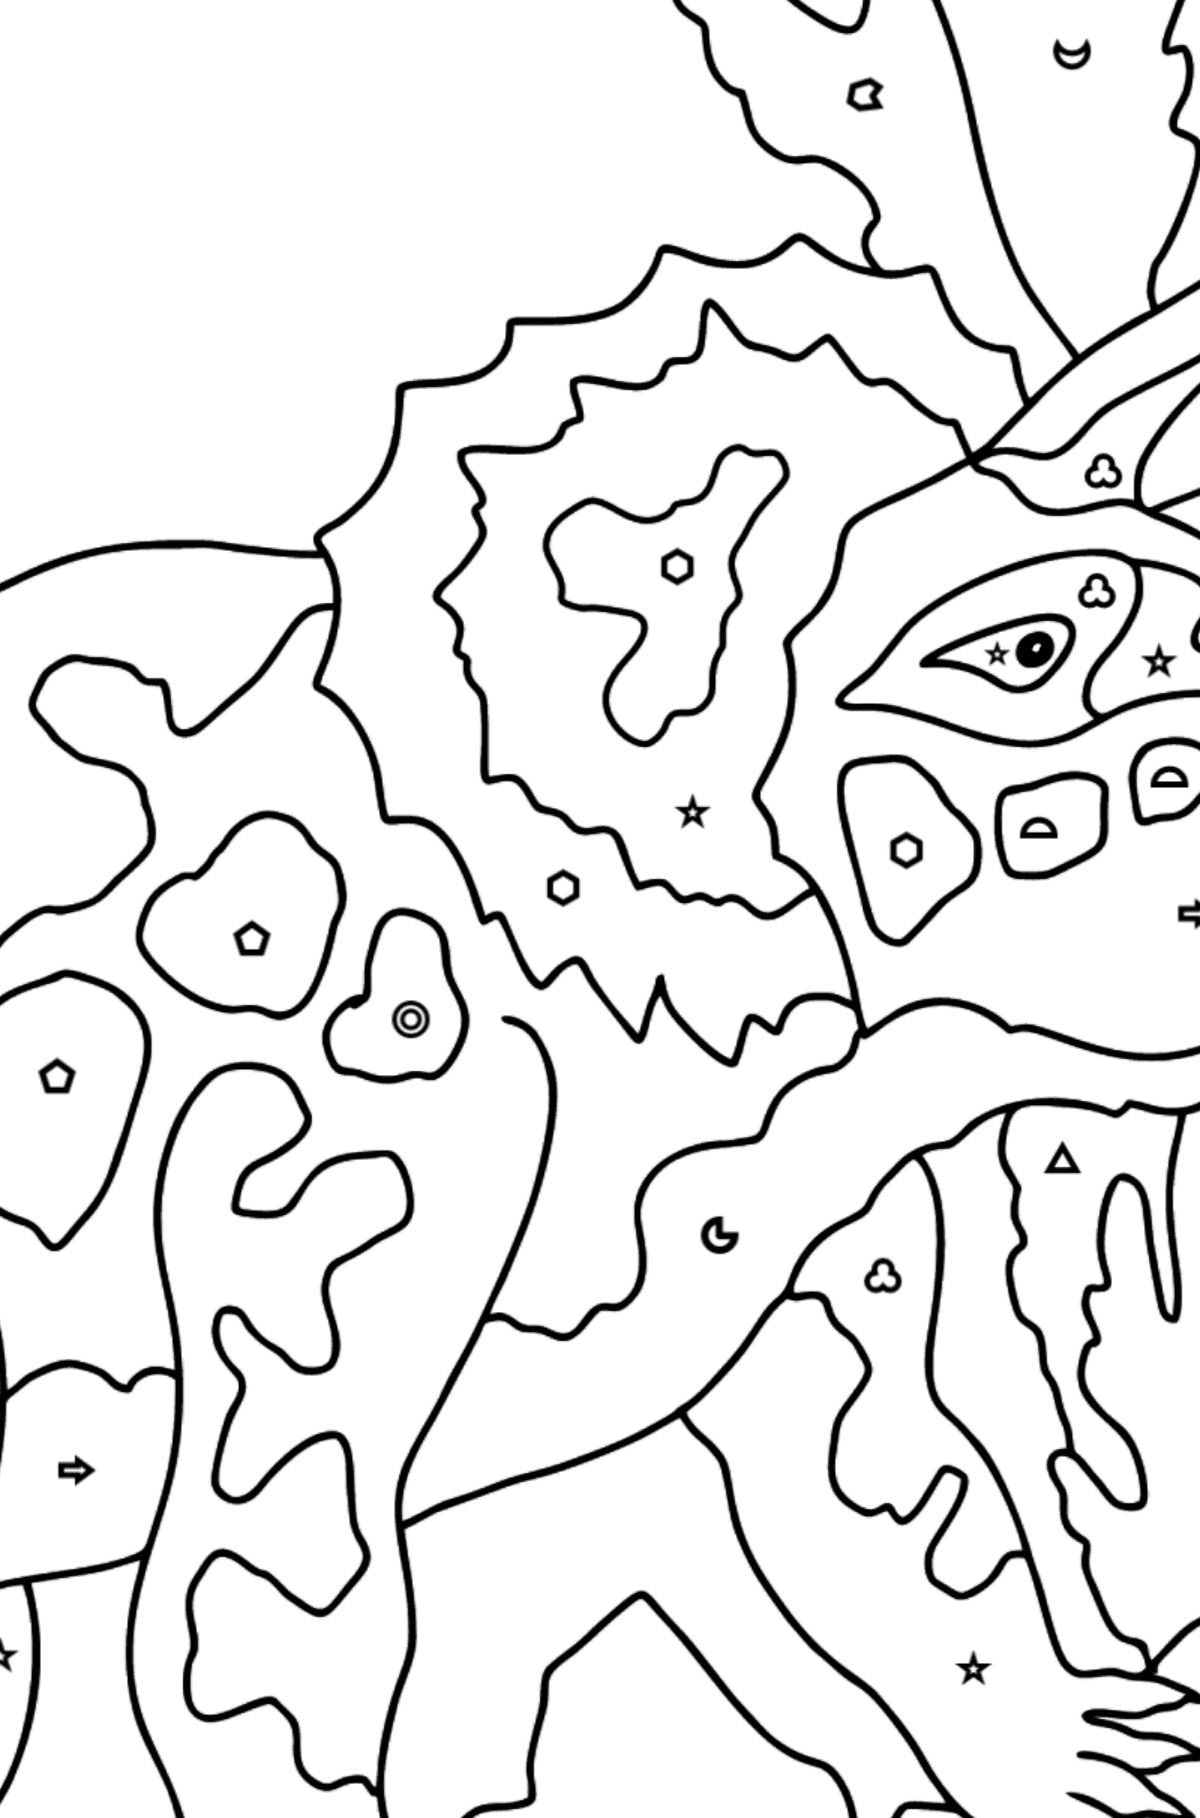 Coloring Page - Triceratops - A Grass-Eating Dinosaur - Coloring by Geometric Shapes for Kids